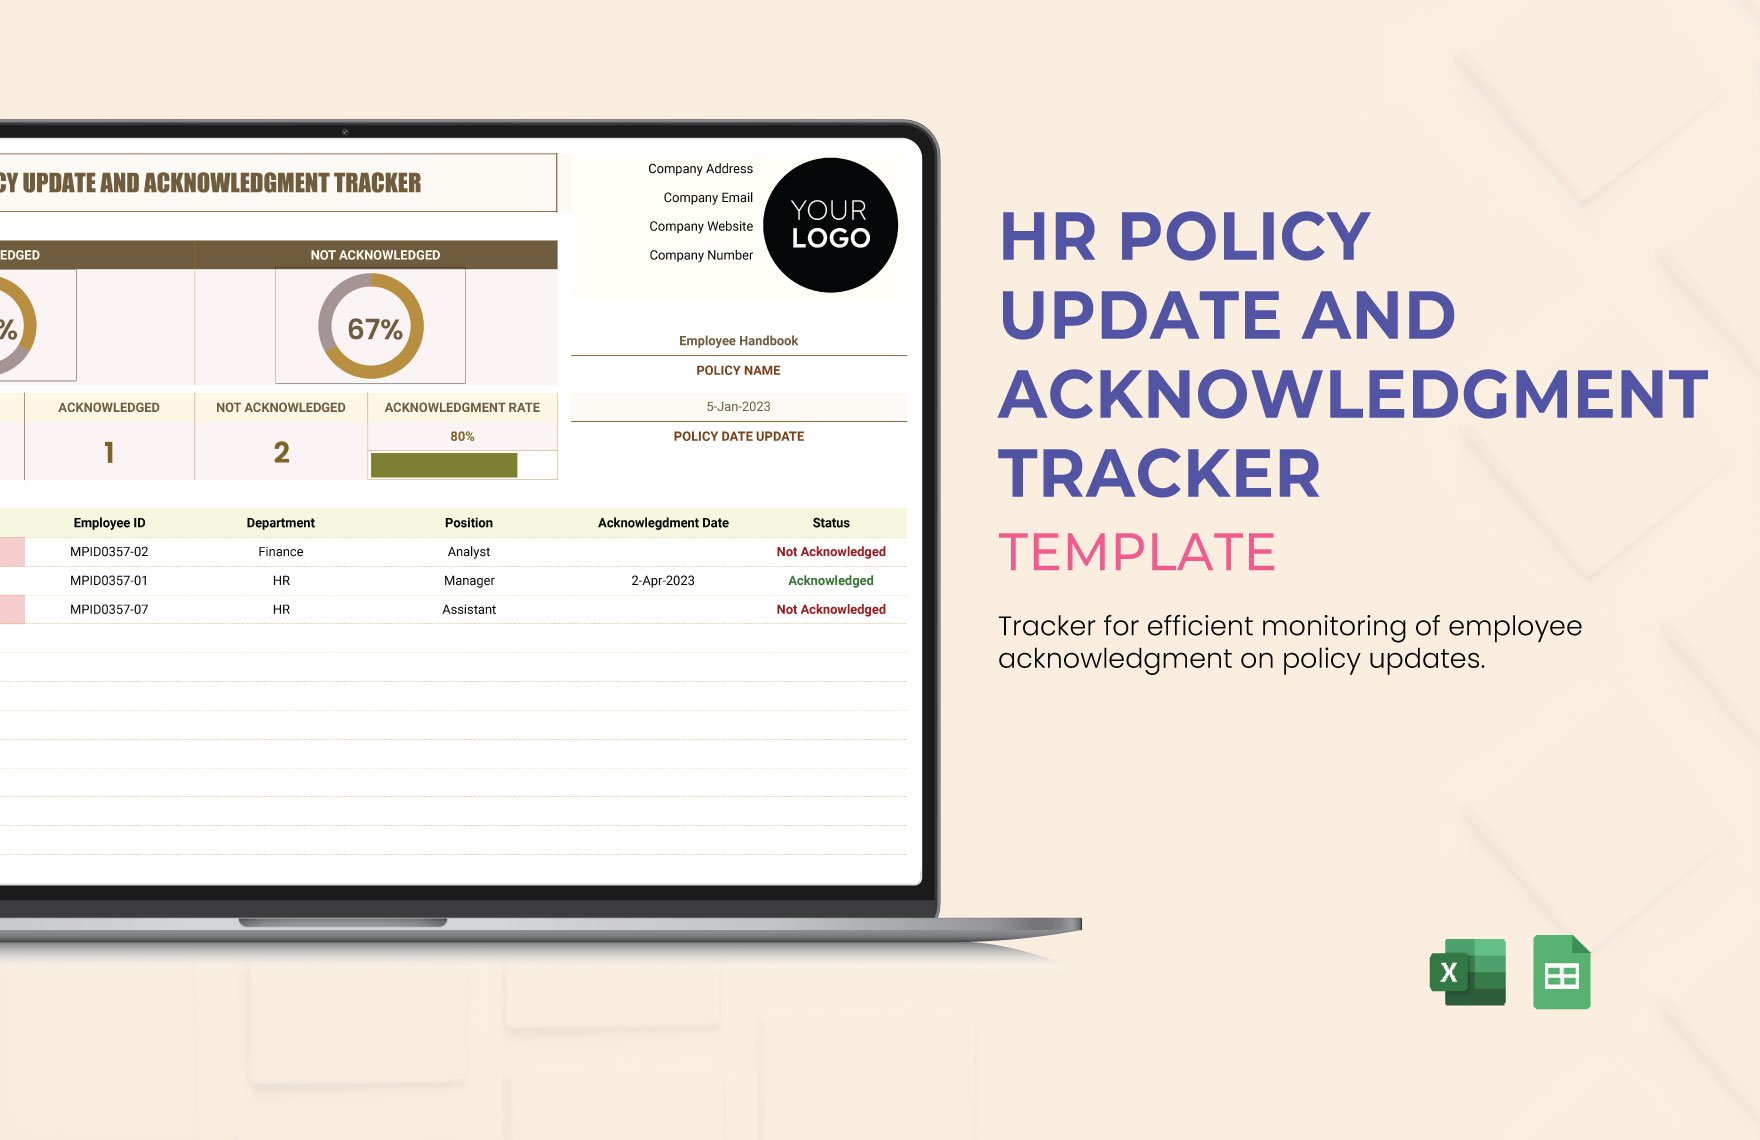 HR Policy Update and Acknowledgment Tracker Template